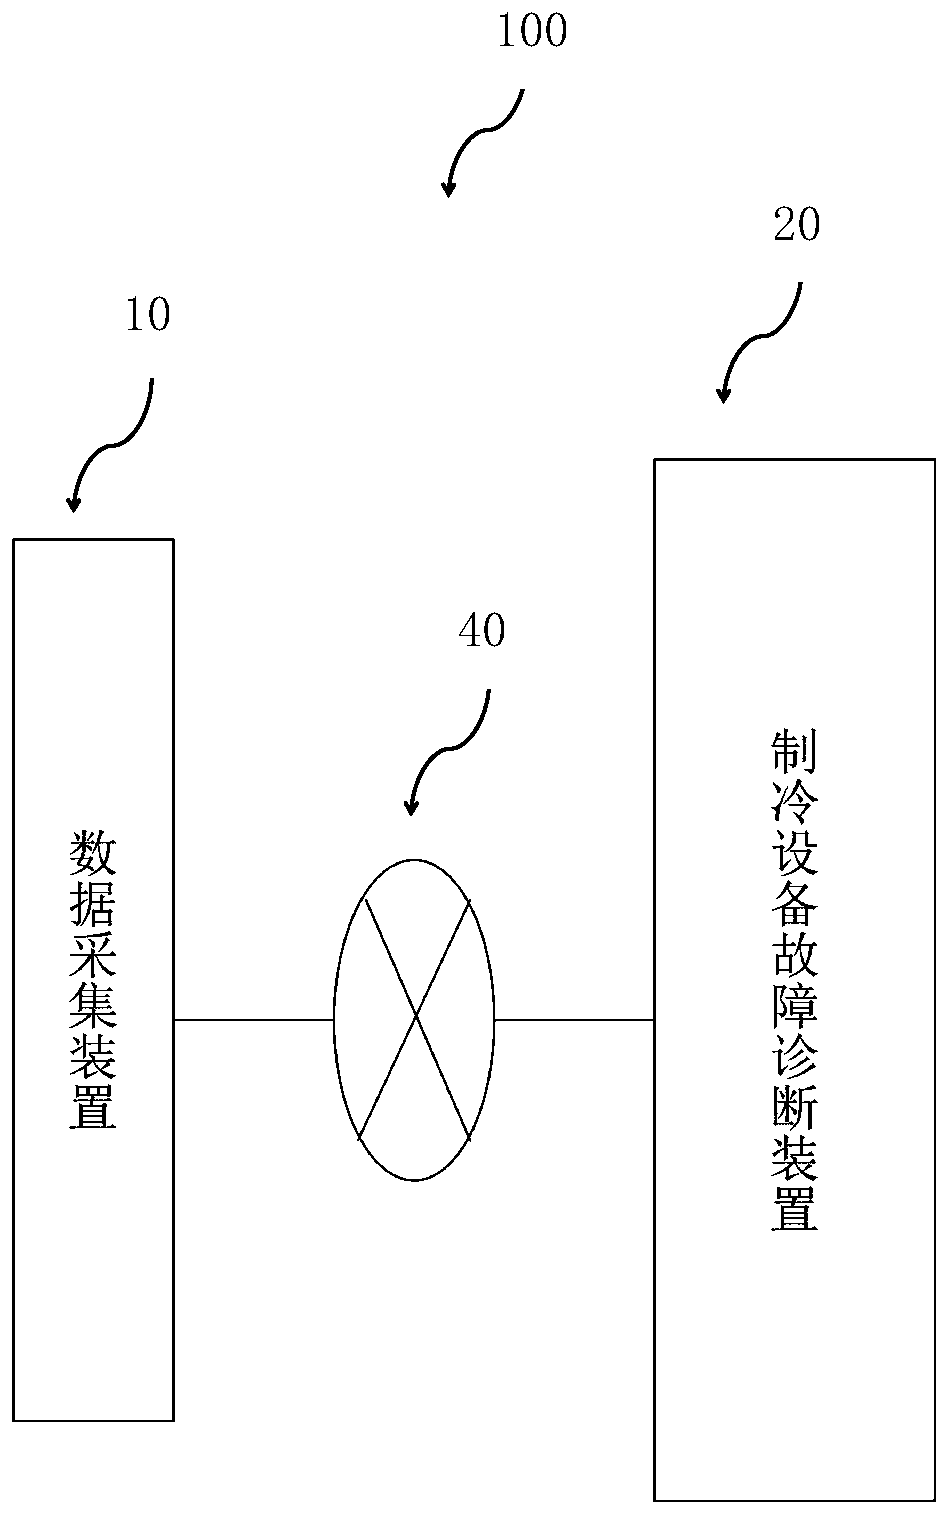 A refrigeration equipment fault diagnosis device and system